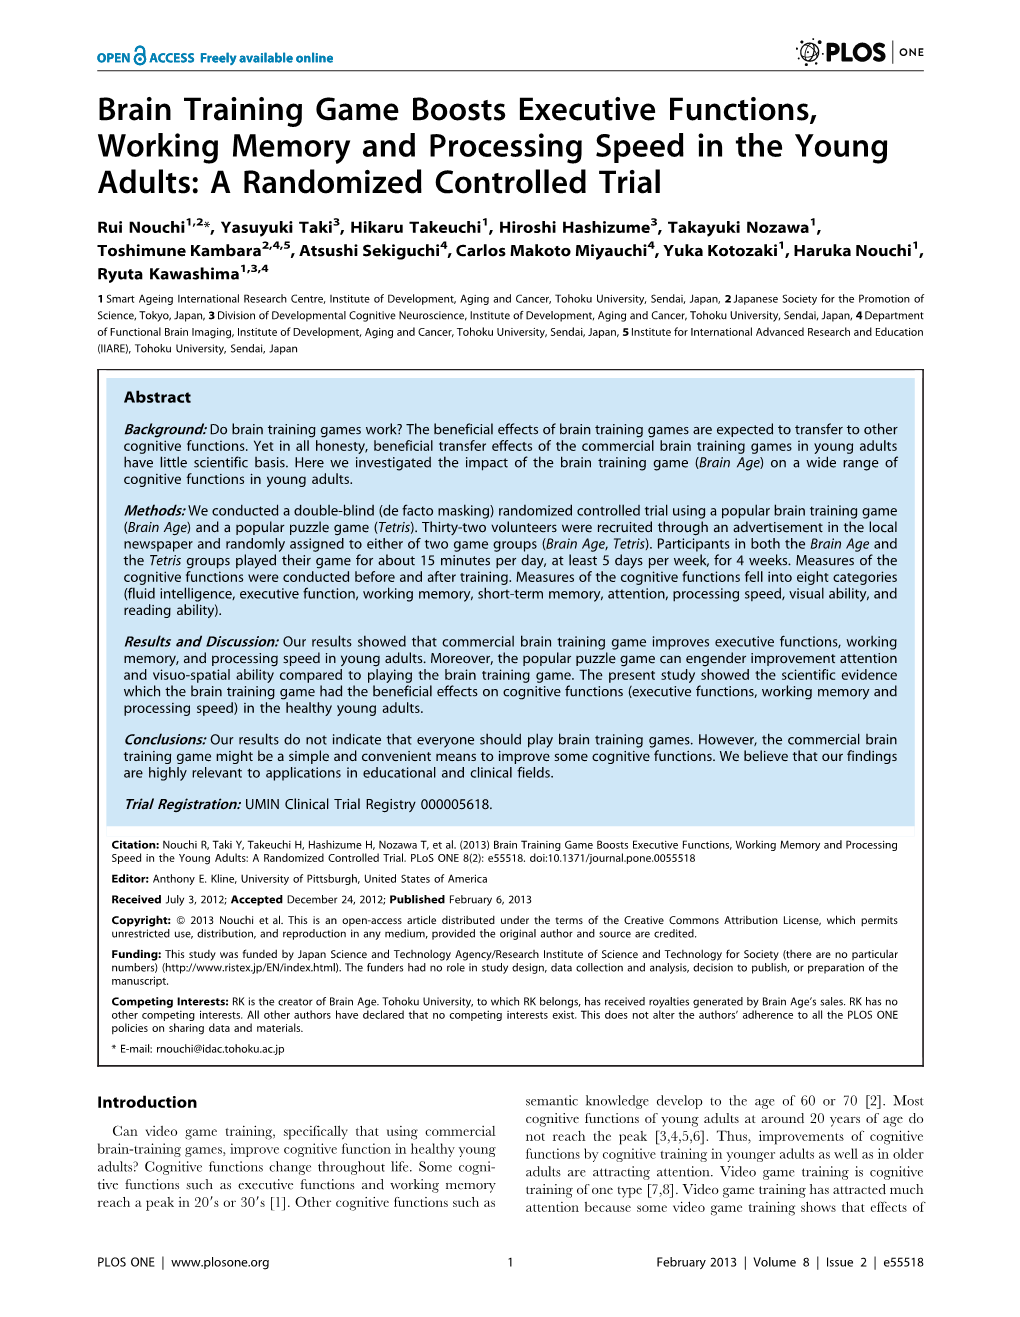 Brain Training Game Boosts Executive Functions, Working Memory and Processing Speed in the Young Adults: a Randomized Controlled Trial